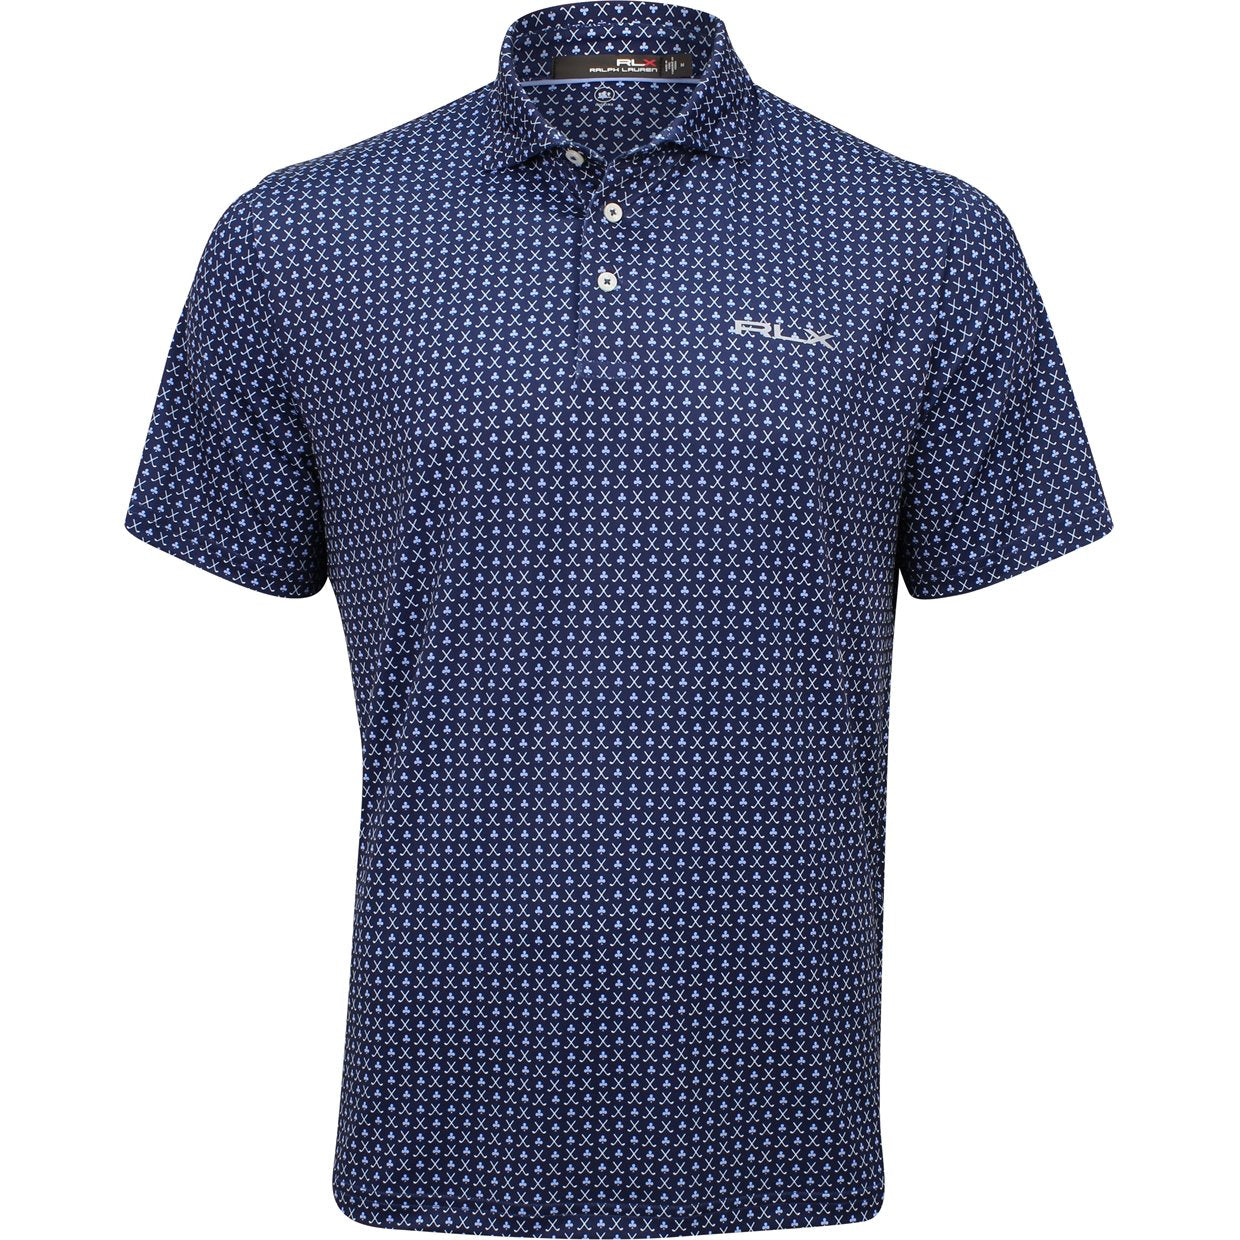 Best golf gifts: 12 great polos for the golfer on your holiday shopping ...